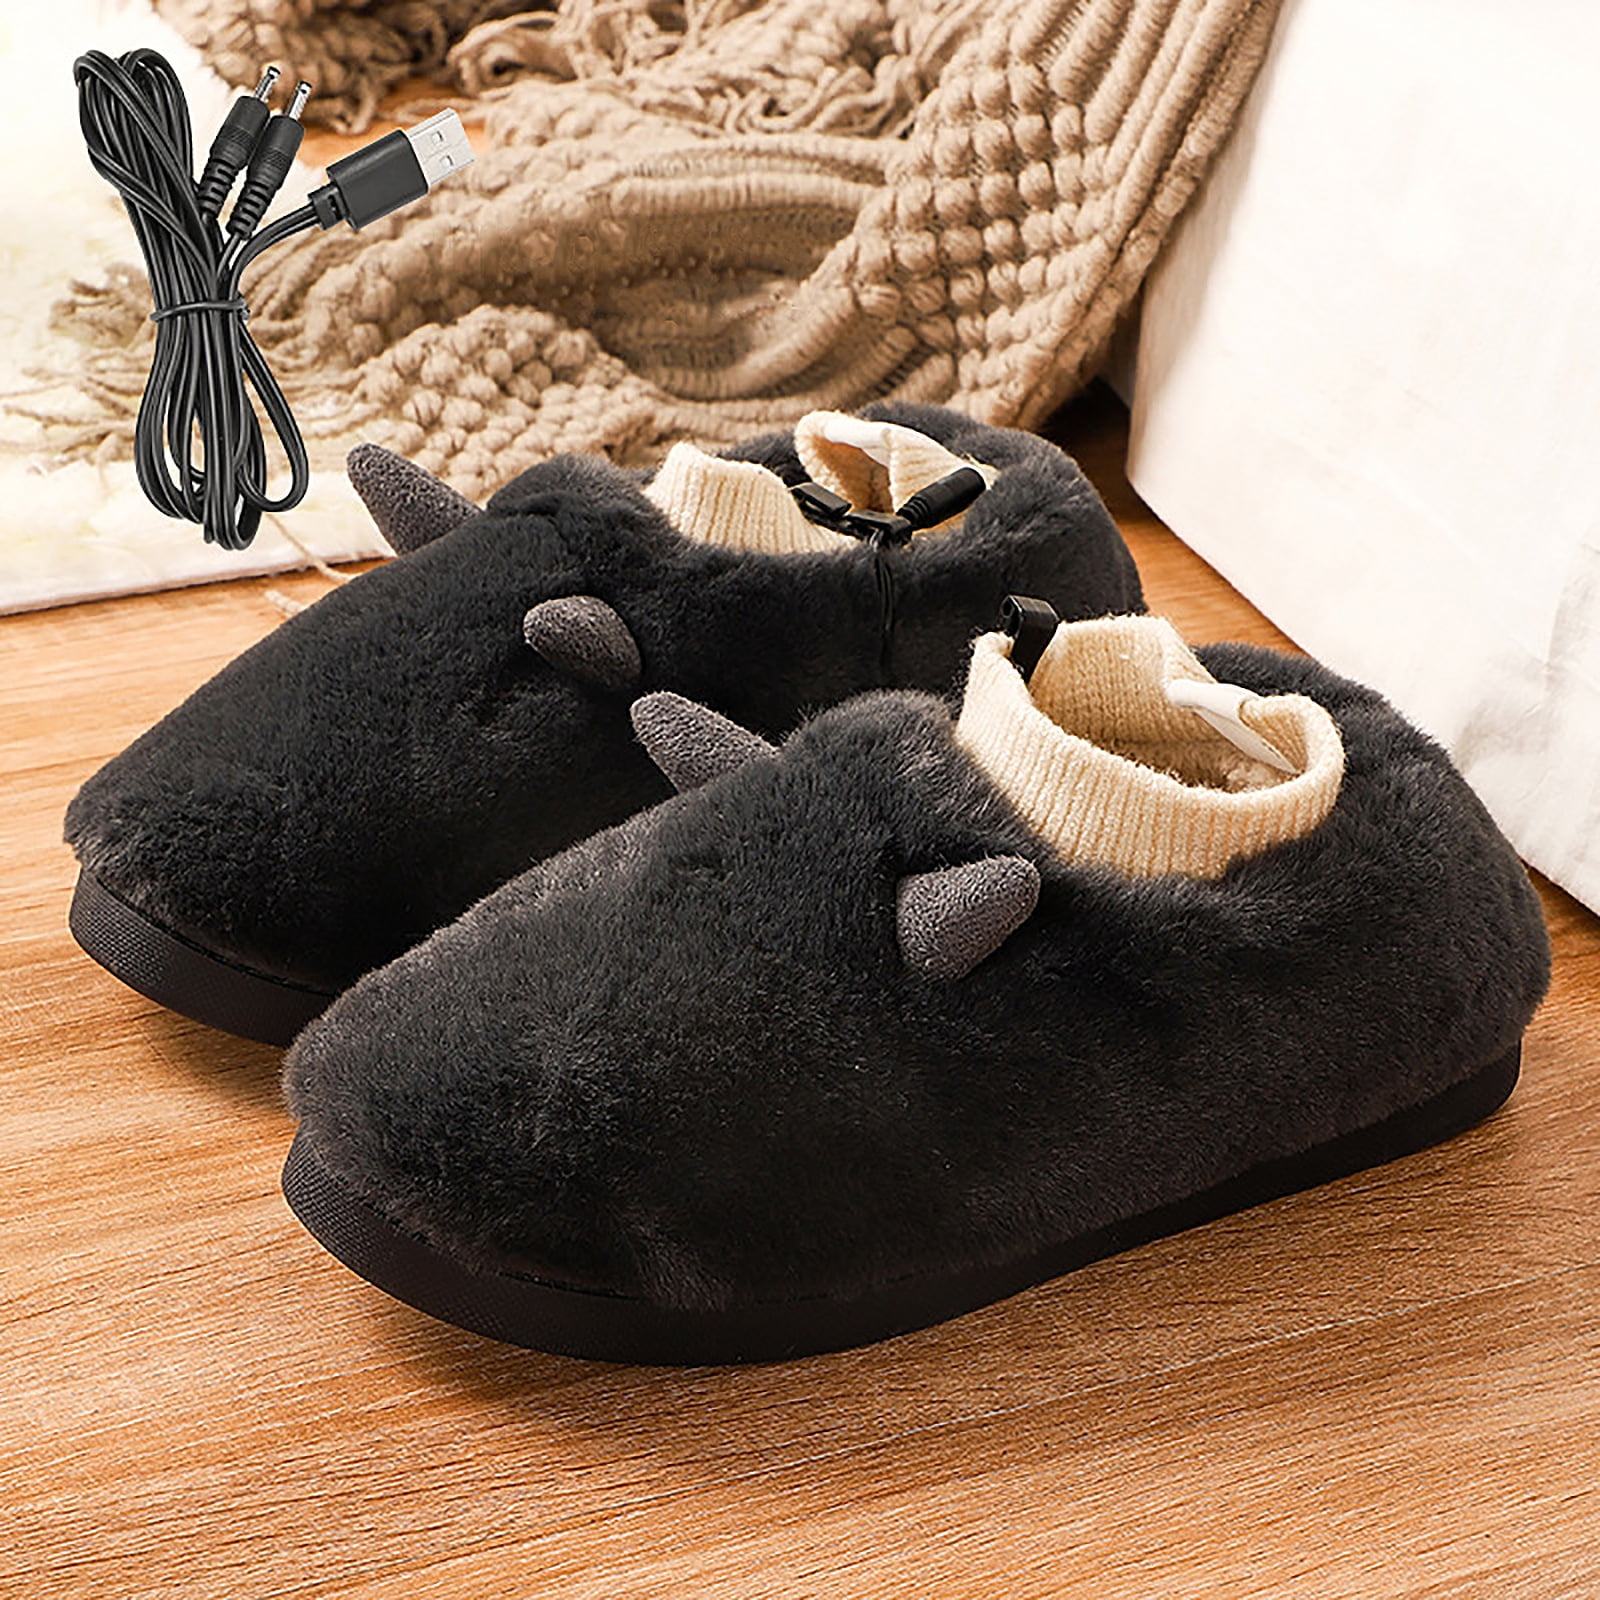 Winter USB Heater Shoes foot Warmers Heating Slippers Plush Warm Shoes Washable 